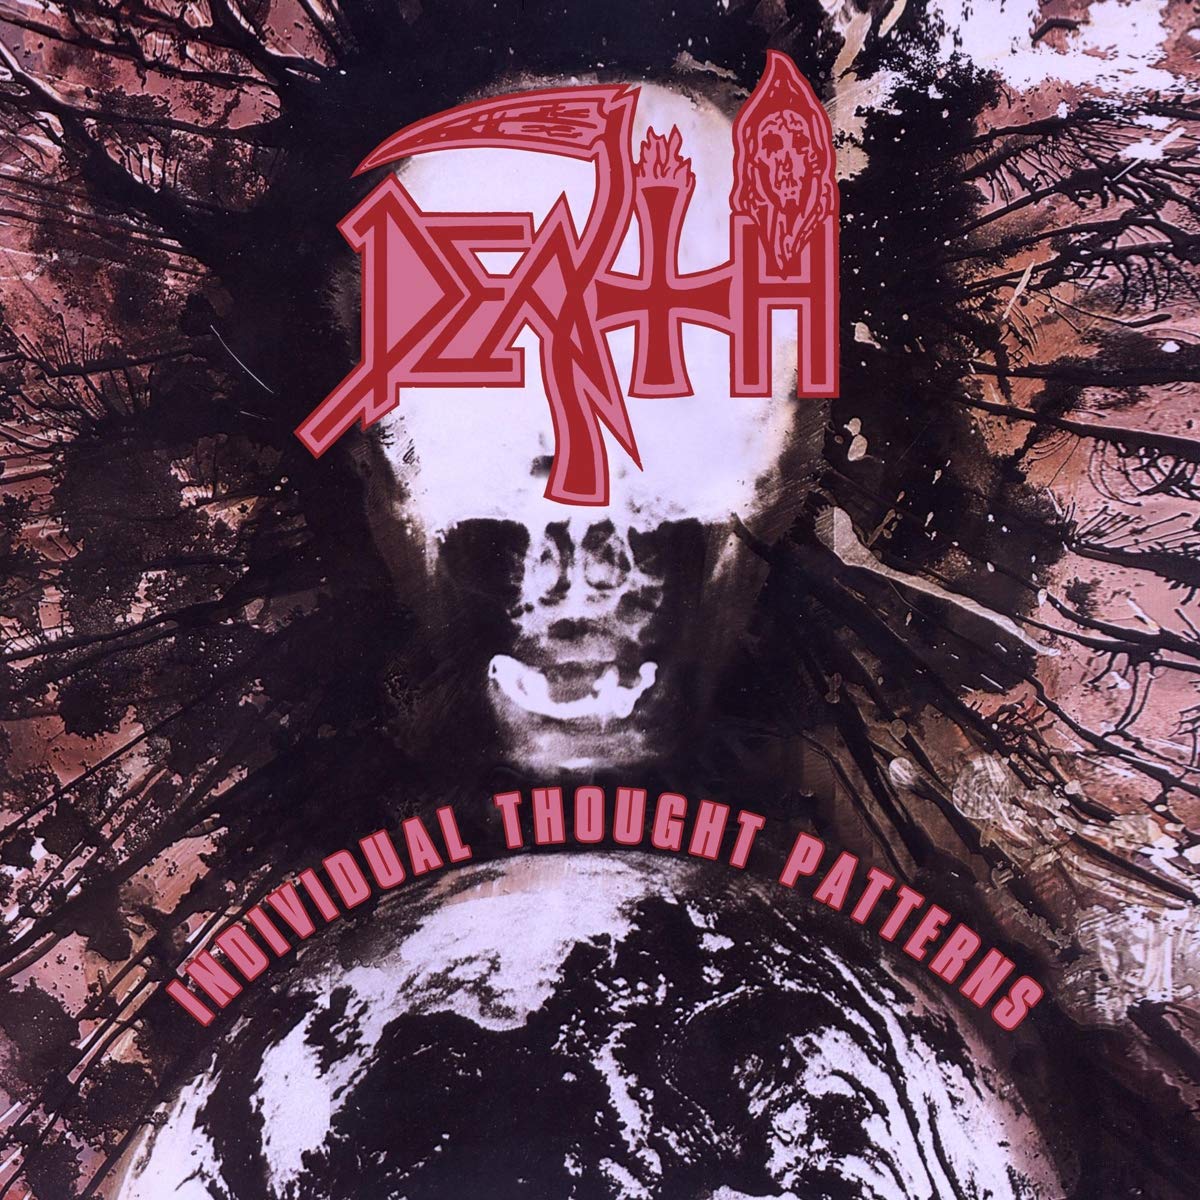 Death - Individual Thought Patters [Colored Vinyl]